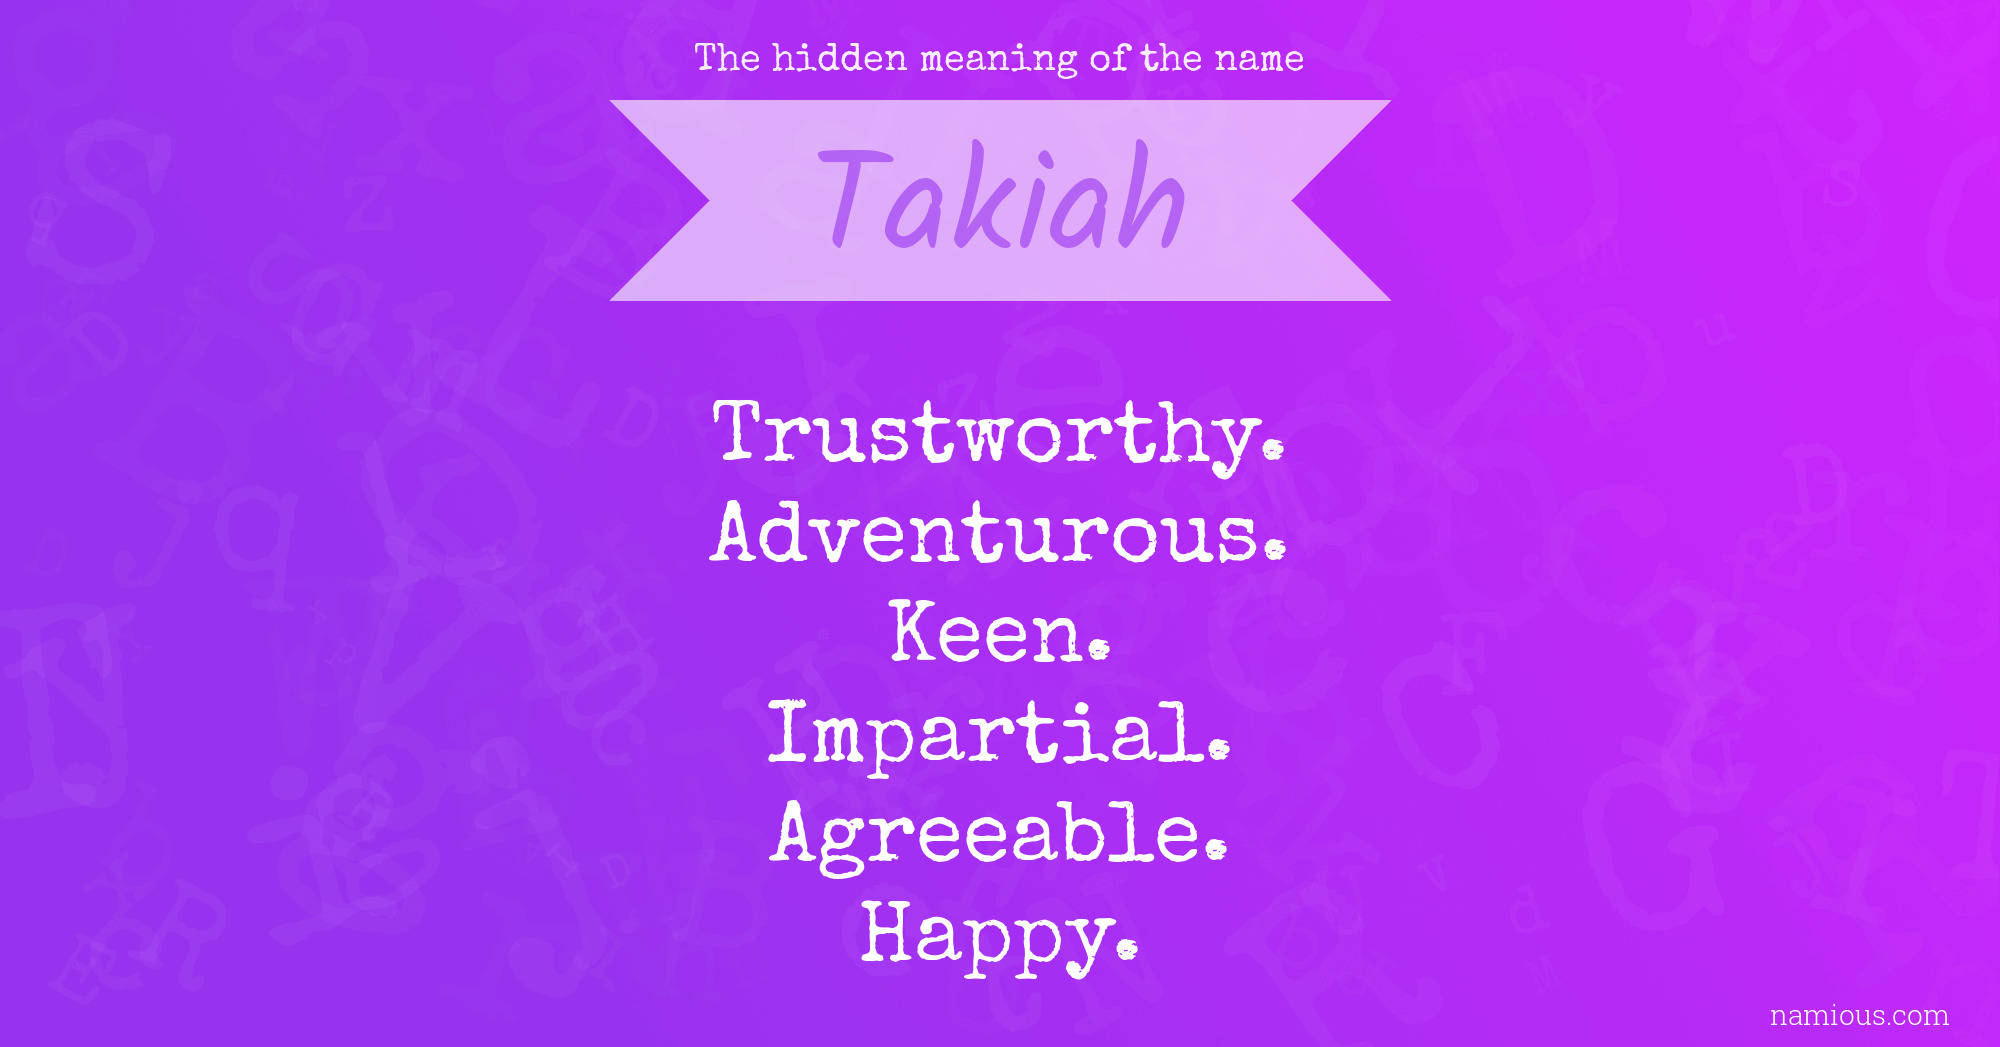 The hidden meaning of the name Takiah